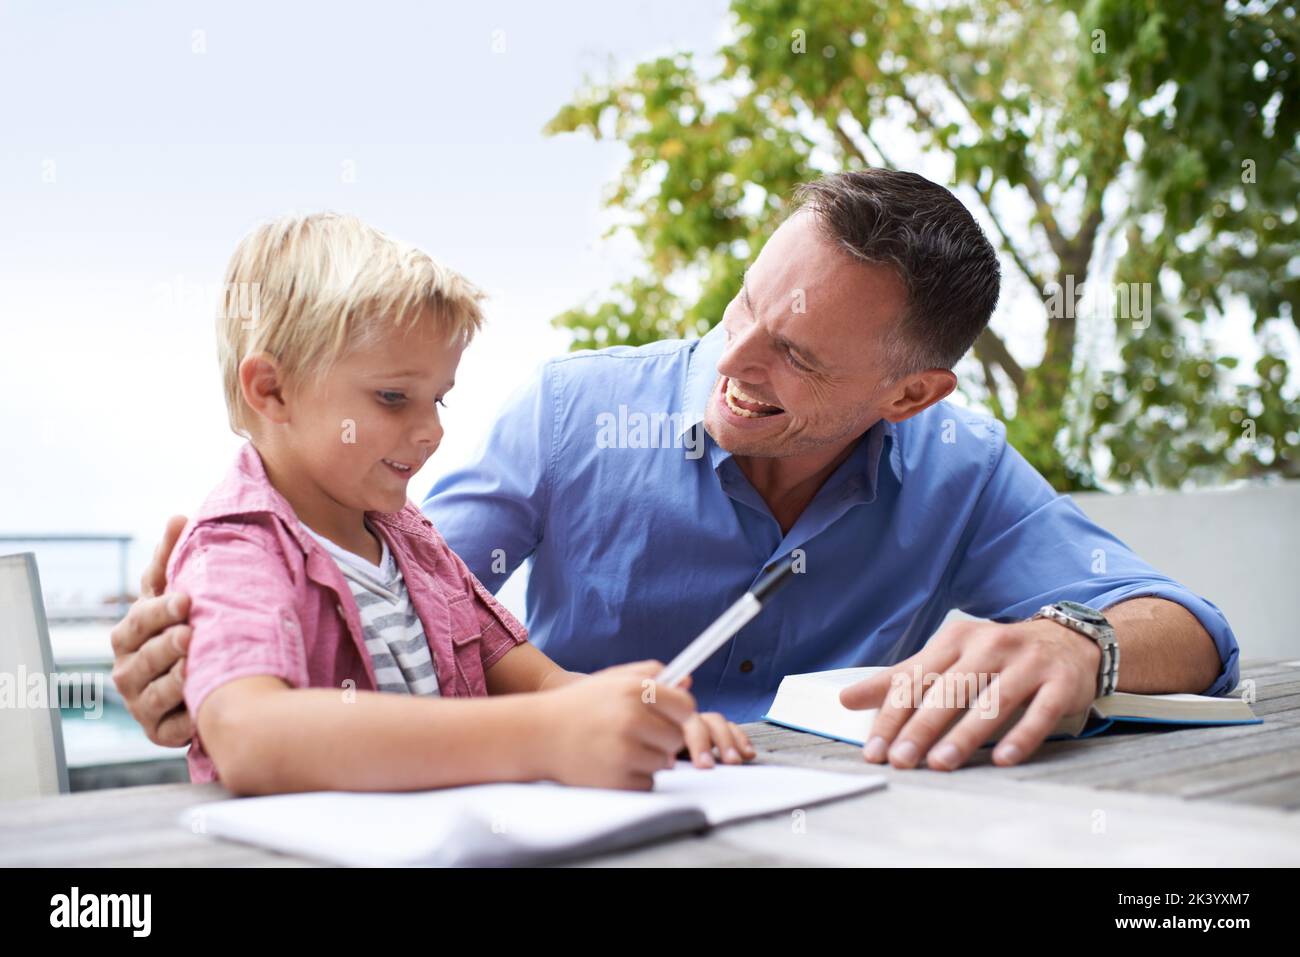 Male bonding. a father helping his son with his coloring book. Stock Photo